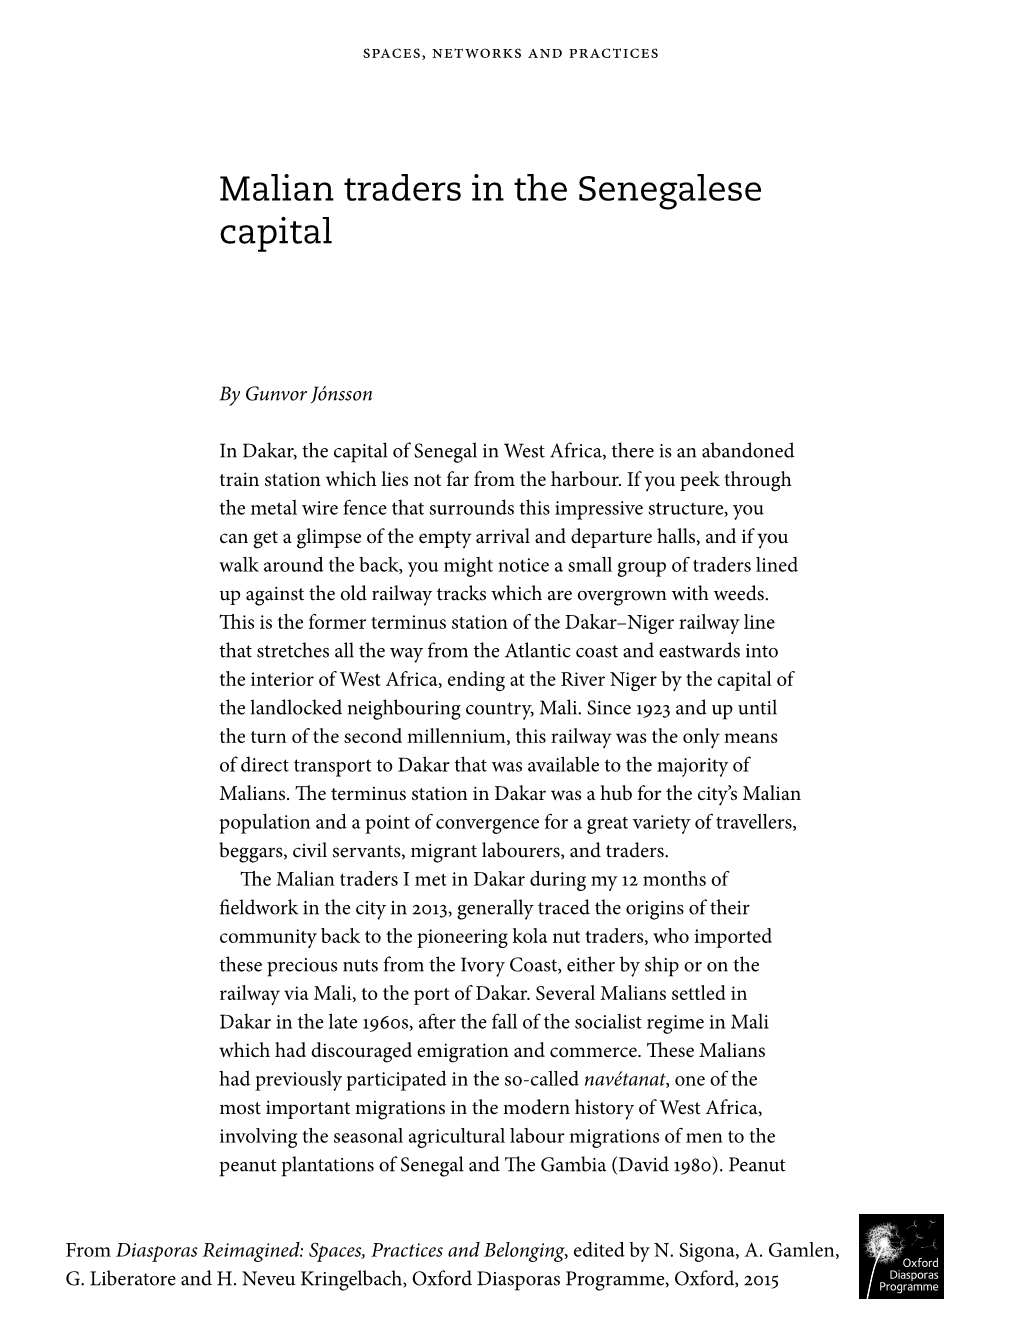 Malian Traders in the Senegalese Capital